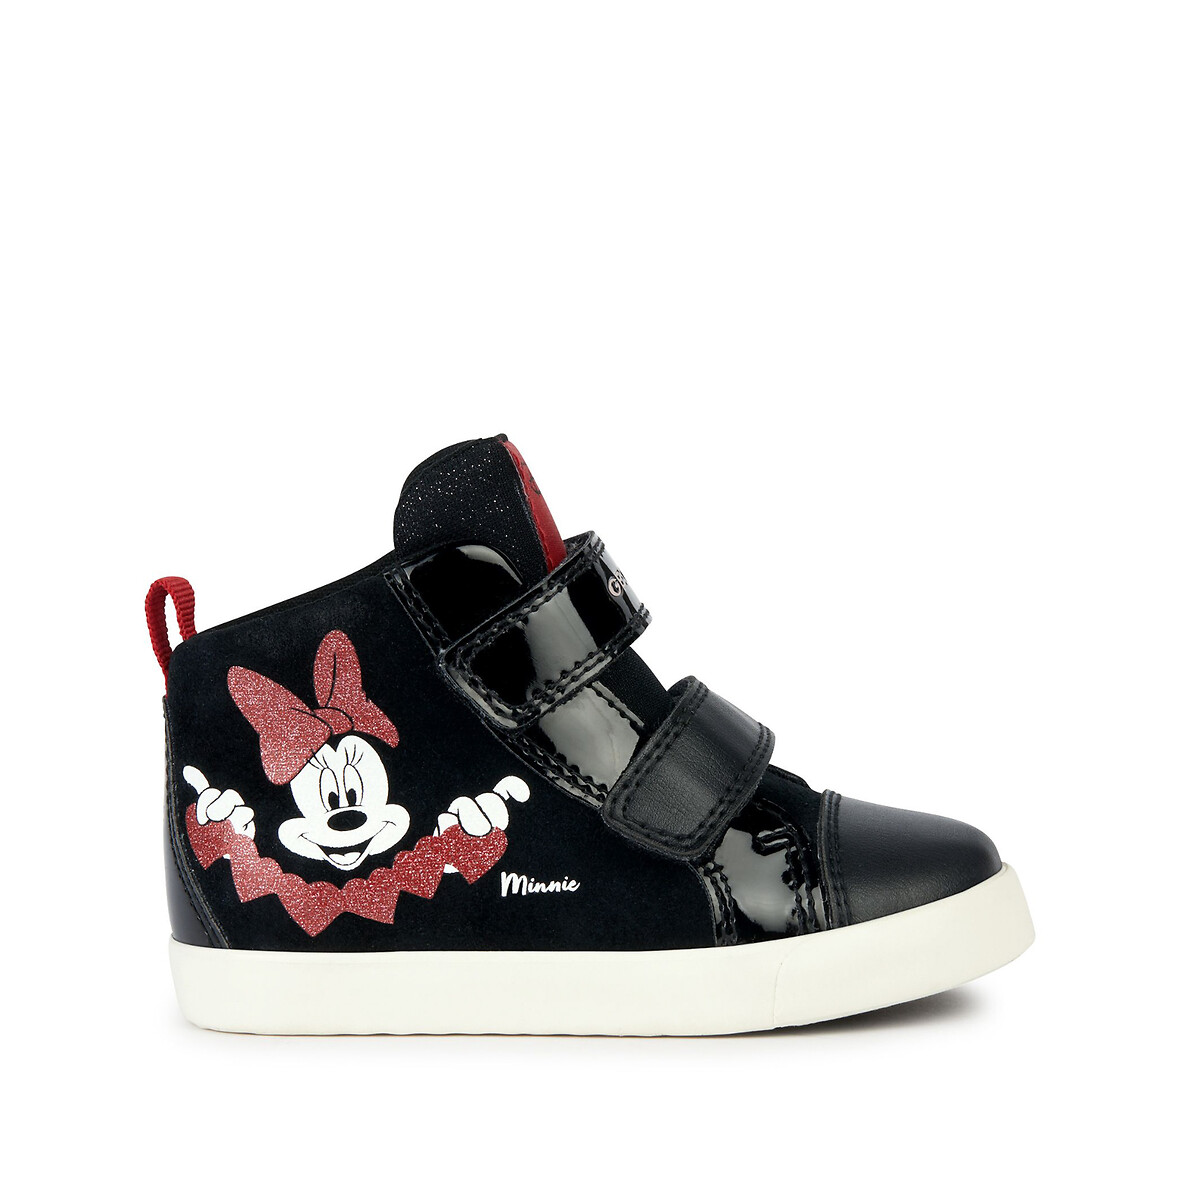 Image of Kids Kilwi x Mini Leather Breathable High Top Trainers with Touch 'n' Close Fastening